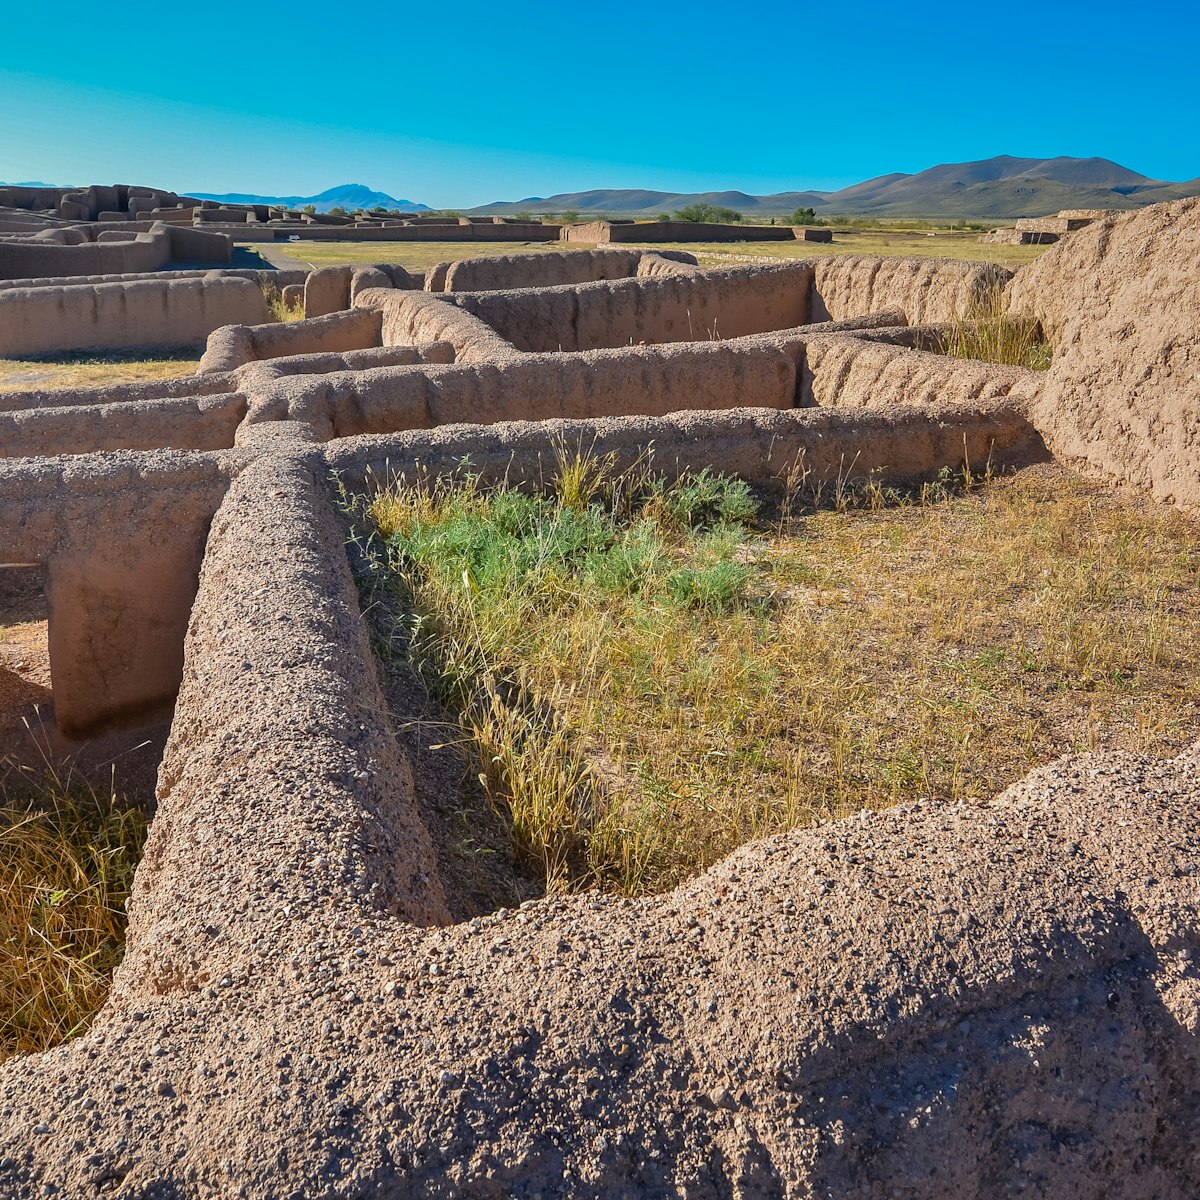 Paquime, Casas Grandes, a prehistoric archaeological site in Chihuahua, Mexico.